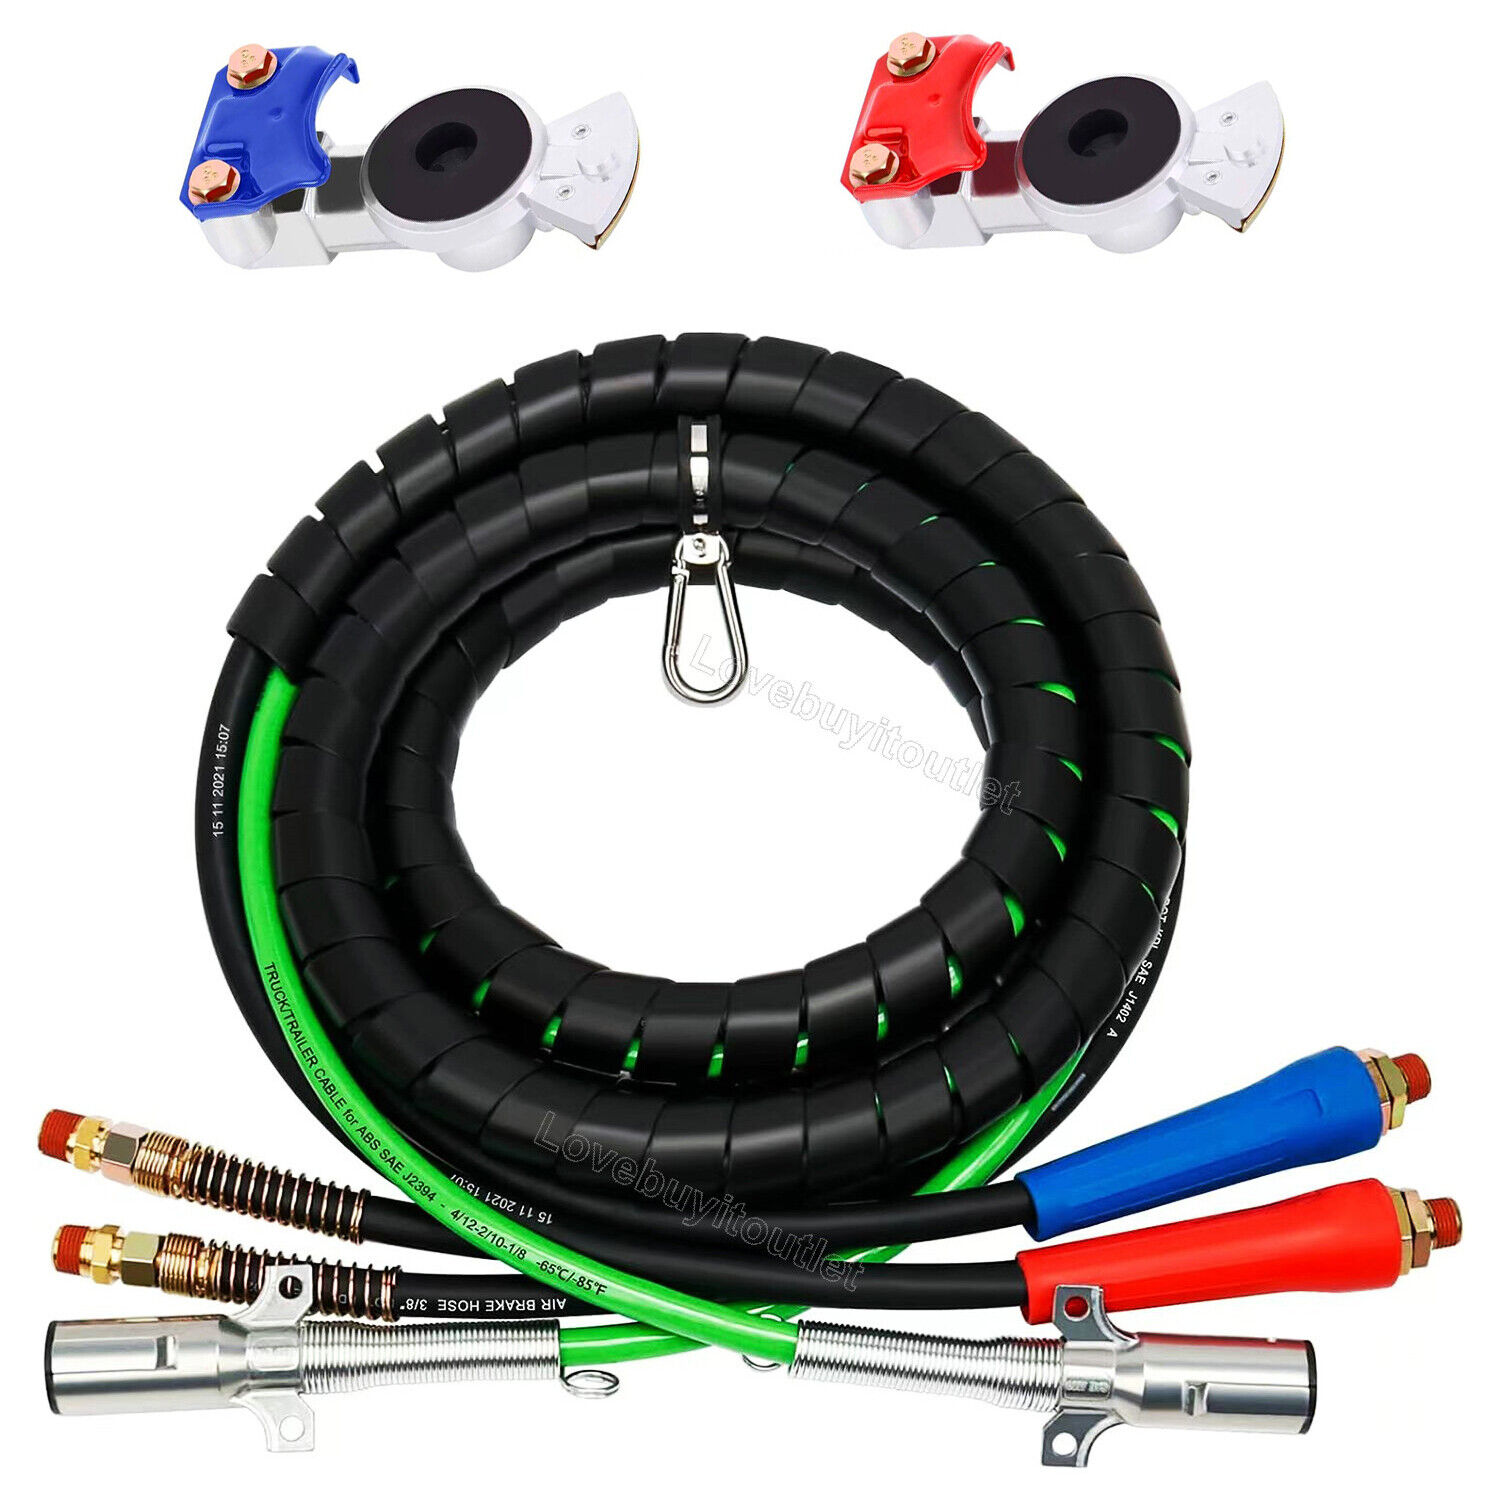 12 FEET 3 in 1 ABS & Power Air Line Hose Wrap 7 Way Electrical Cable